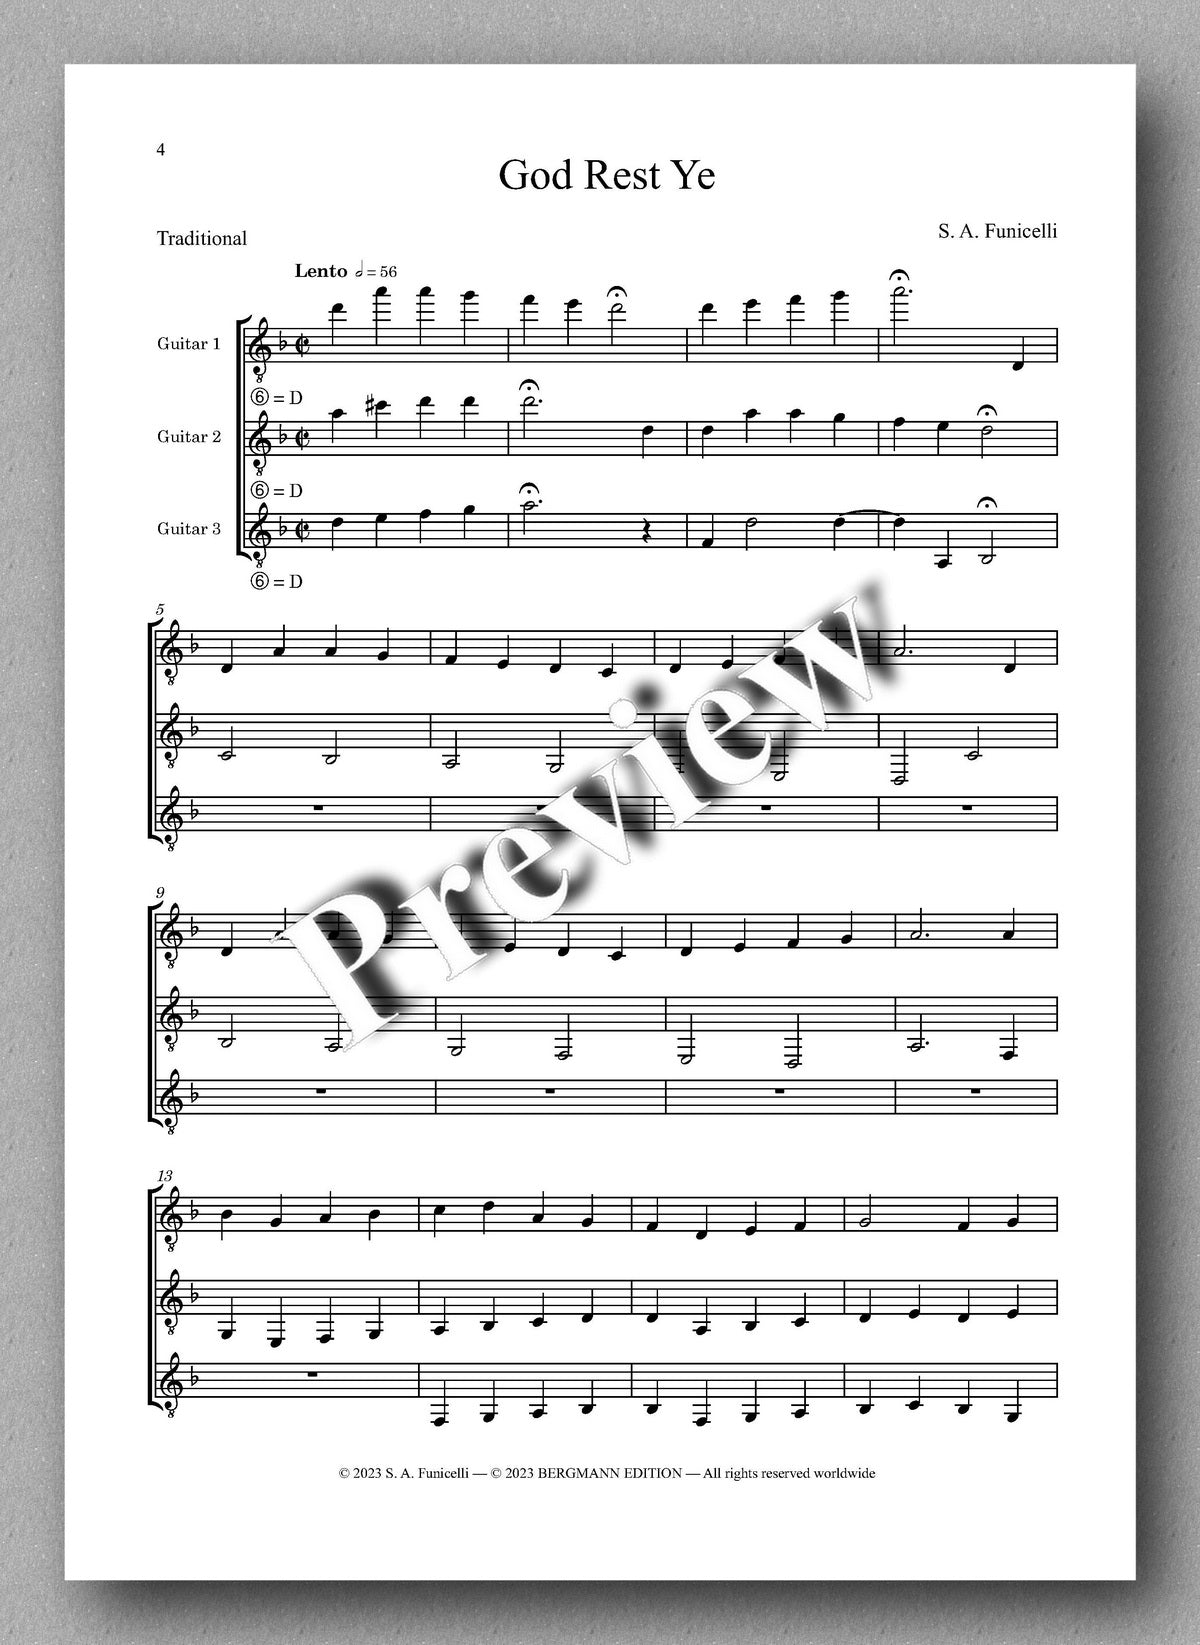 Stanley A Funicelli, God Rest Ye - preview of the music score